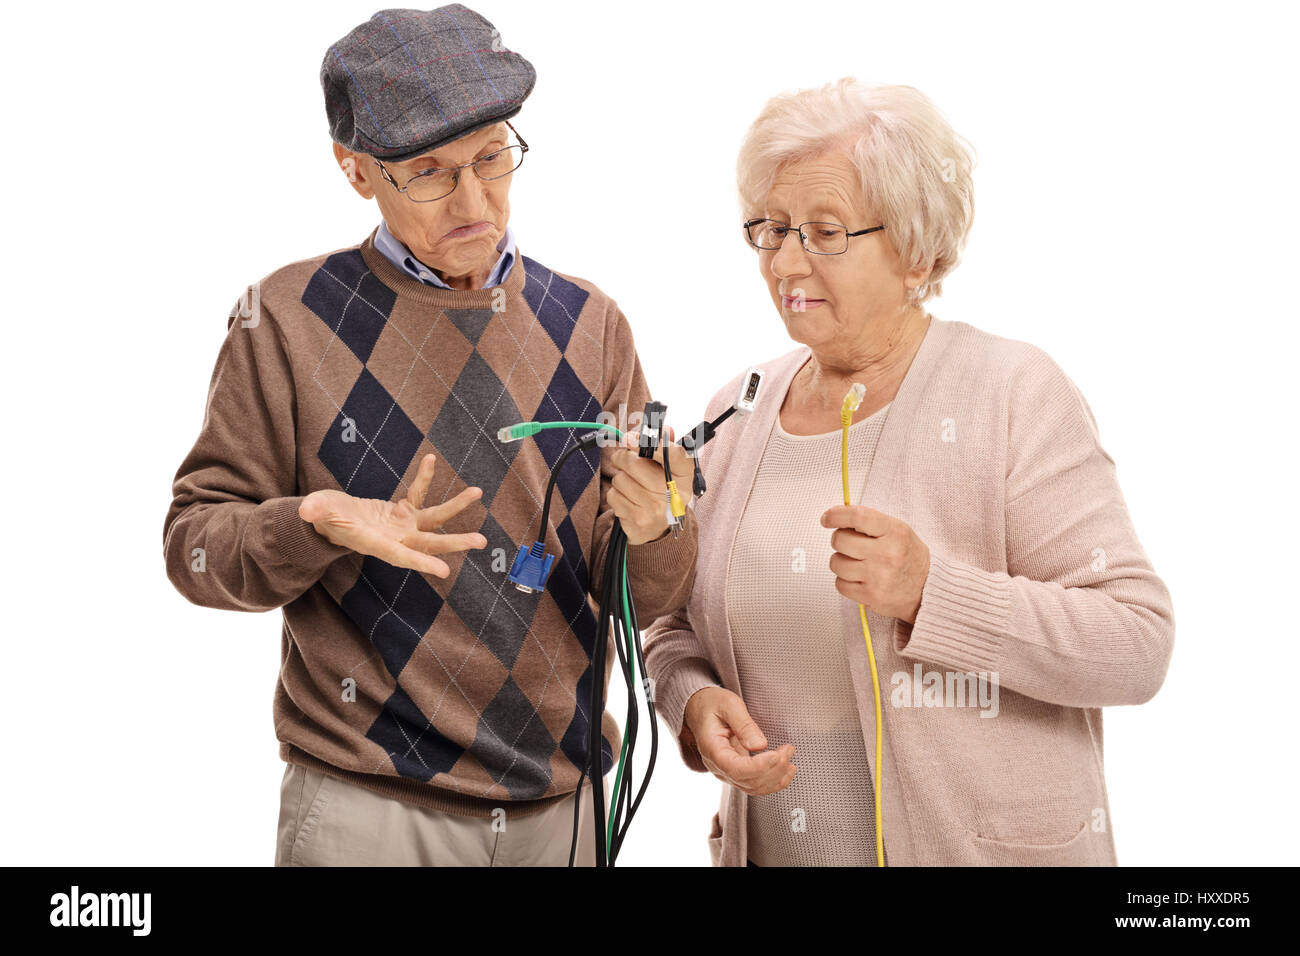 Confused seniors looking at different types of electronic cables isolated on white background Stock Photo